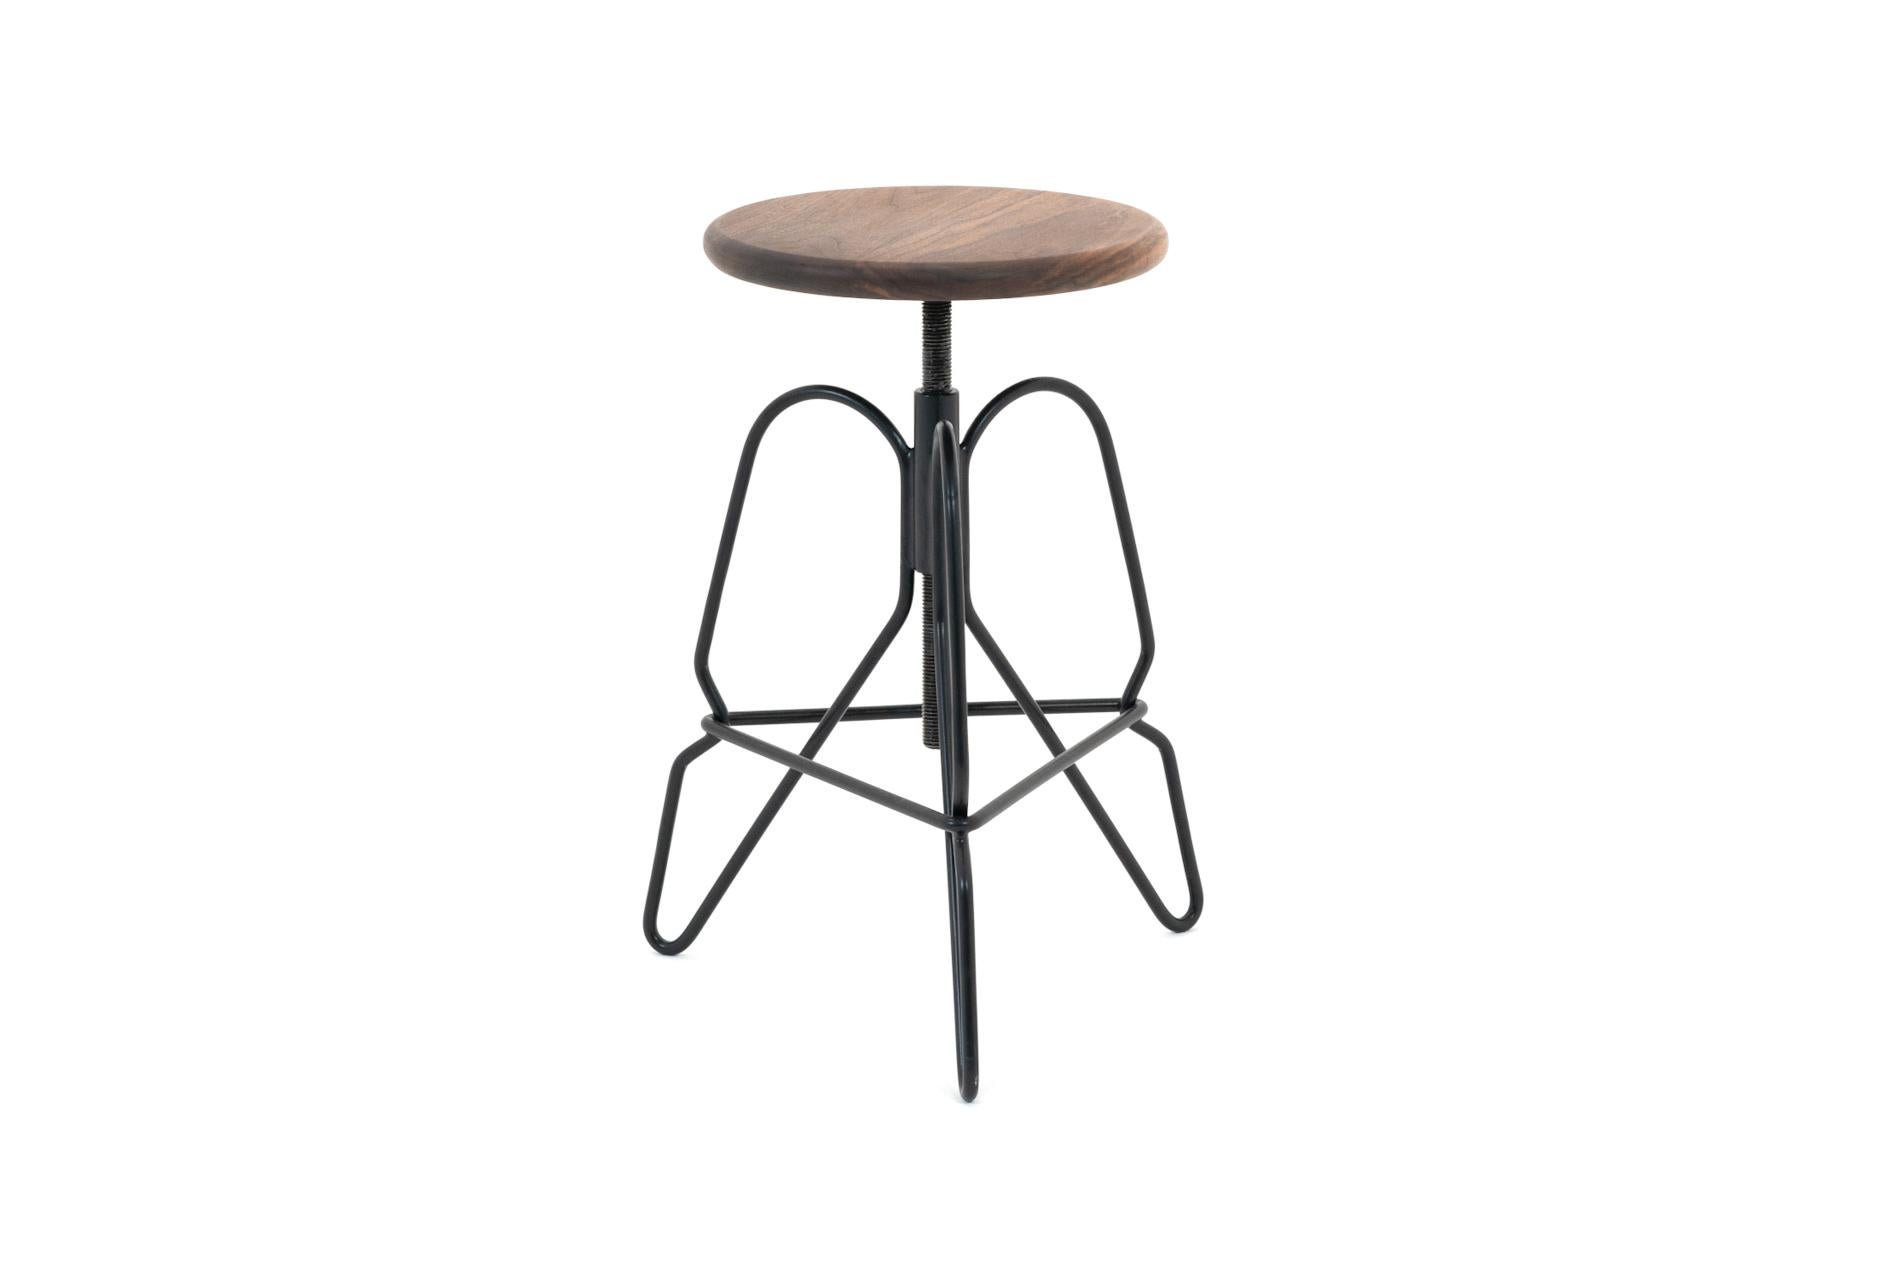 Minimalist Adjustable Rig Stool in Solid Black Walnut Wood and Hand Bent Steel, 'S' For Sale